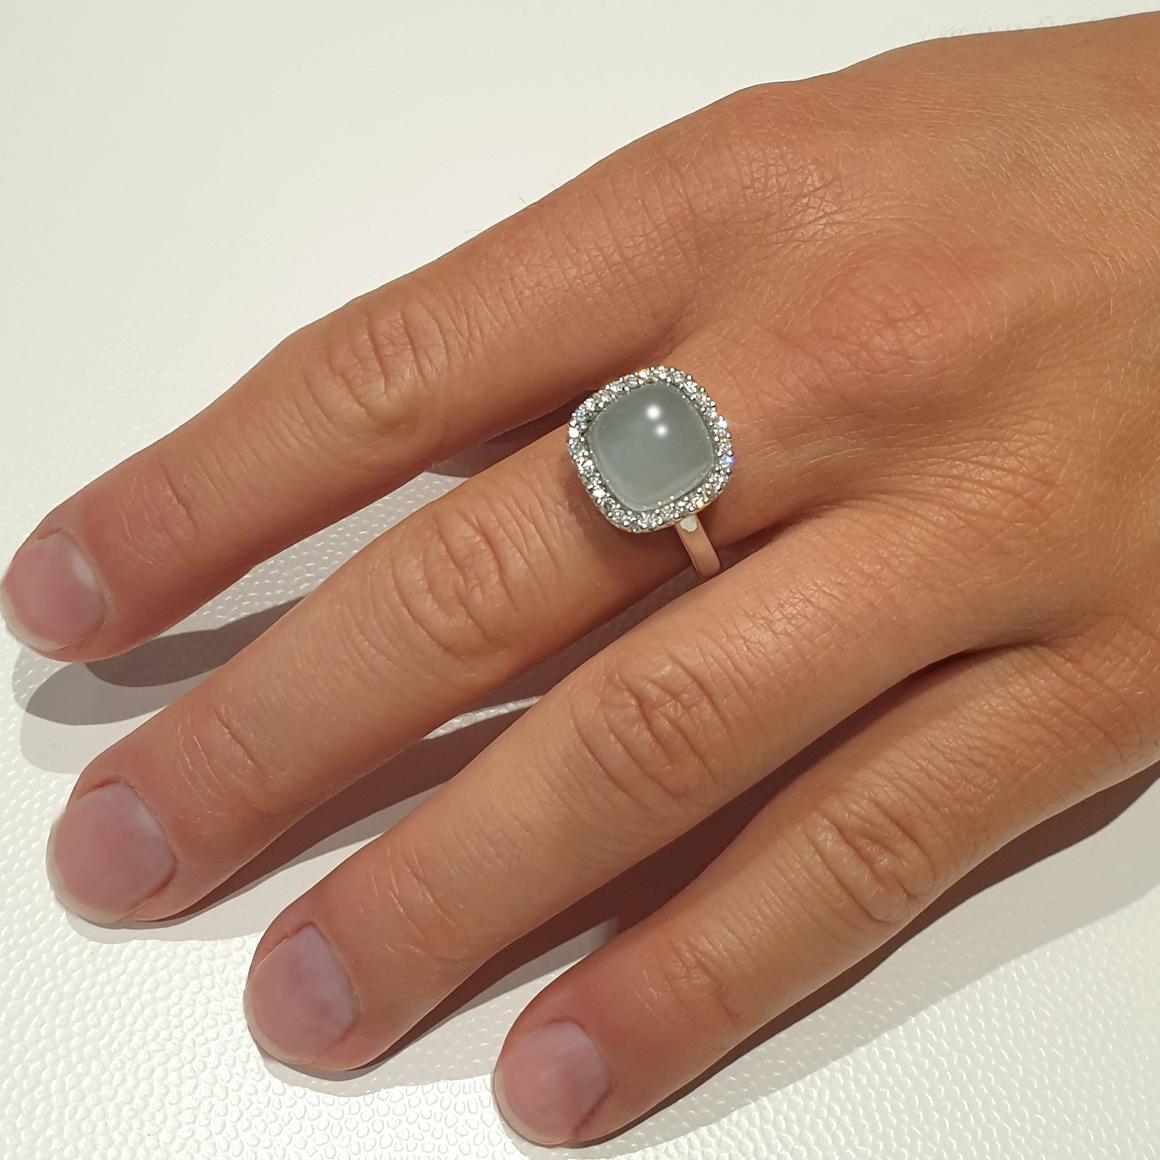  Elegant design ring that lend a class to just any outfit , made in Italy by Stanoppi Jewellery.
Ring in 18k white gold with Aquamarine Milk (square cabochon cut, size: 10x10 mm) and white Diamonds cts 0,35 VS colour G/H. 

Size of ring: EU 13 - USA